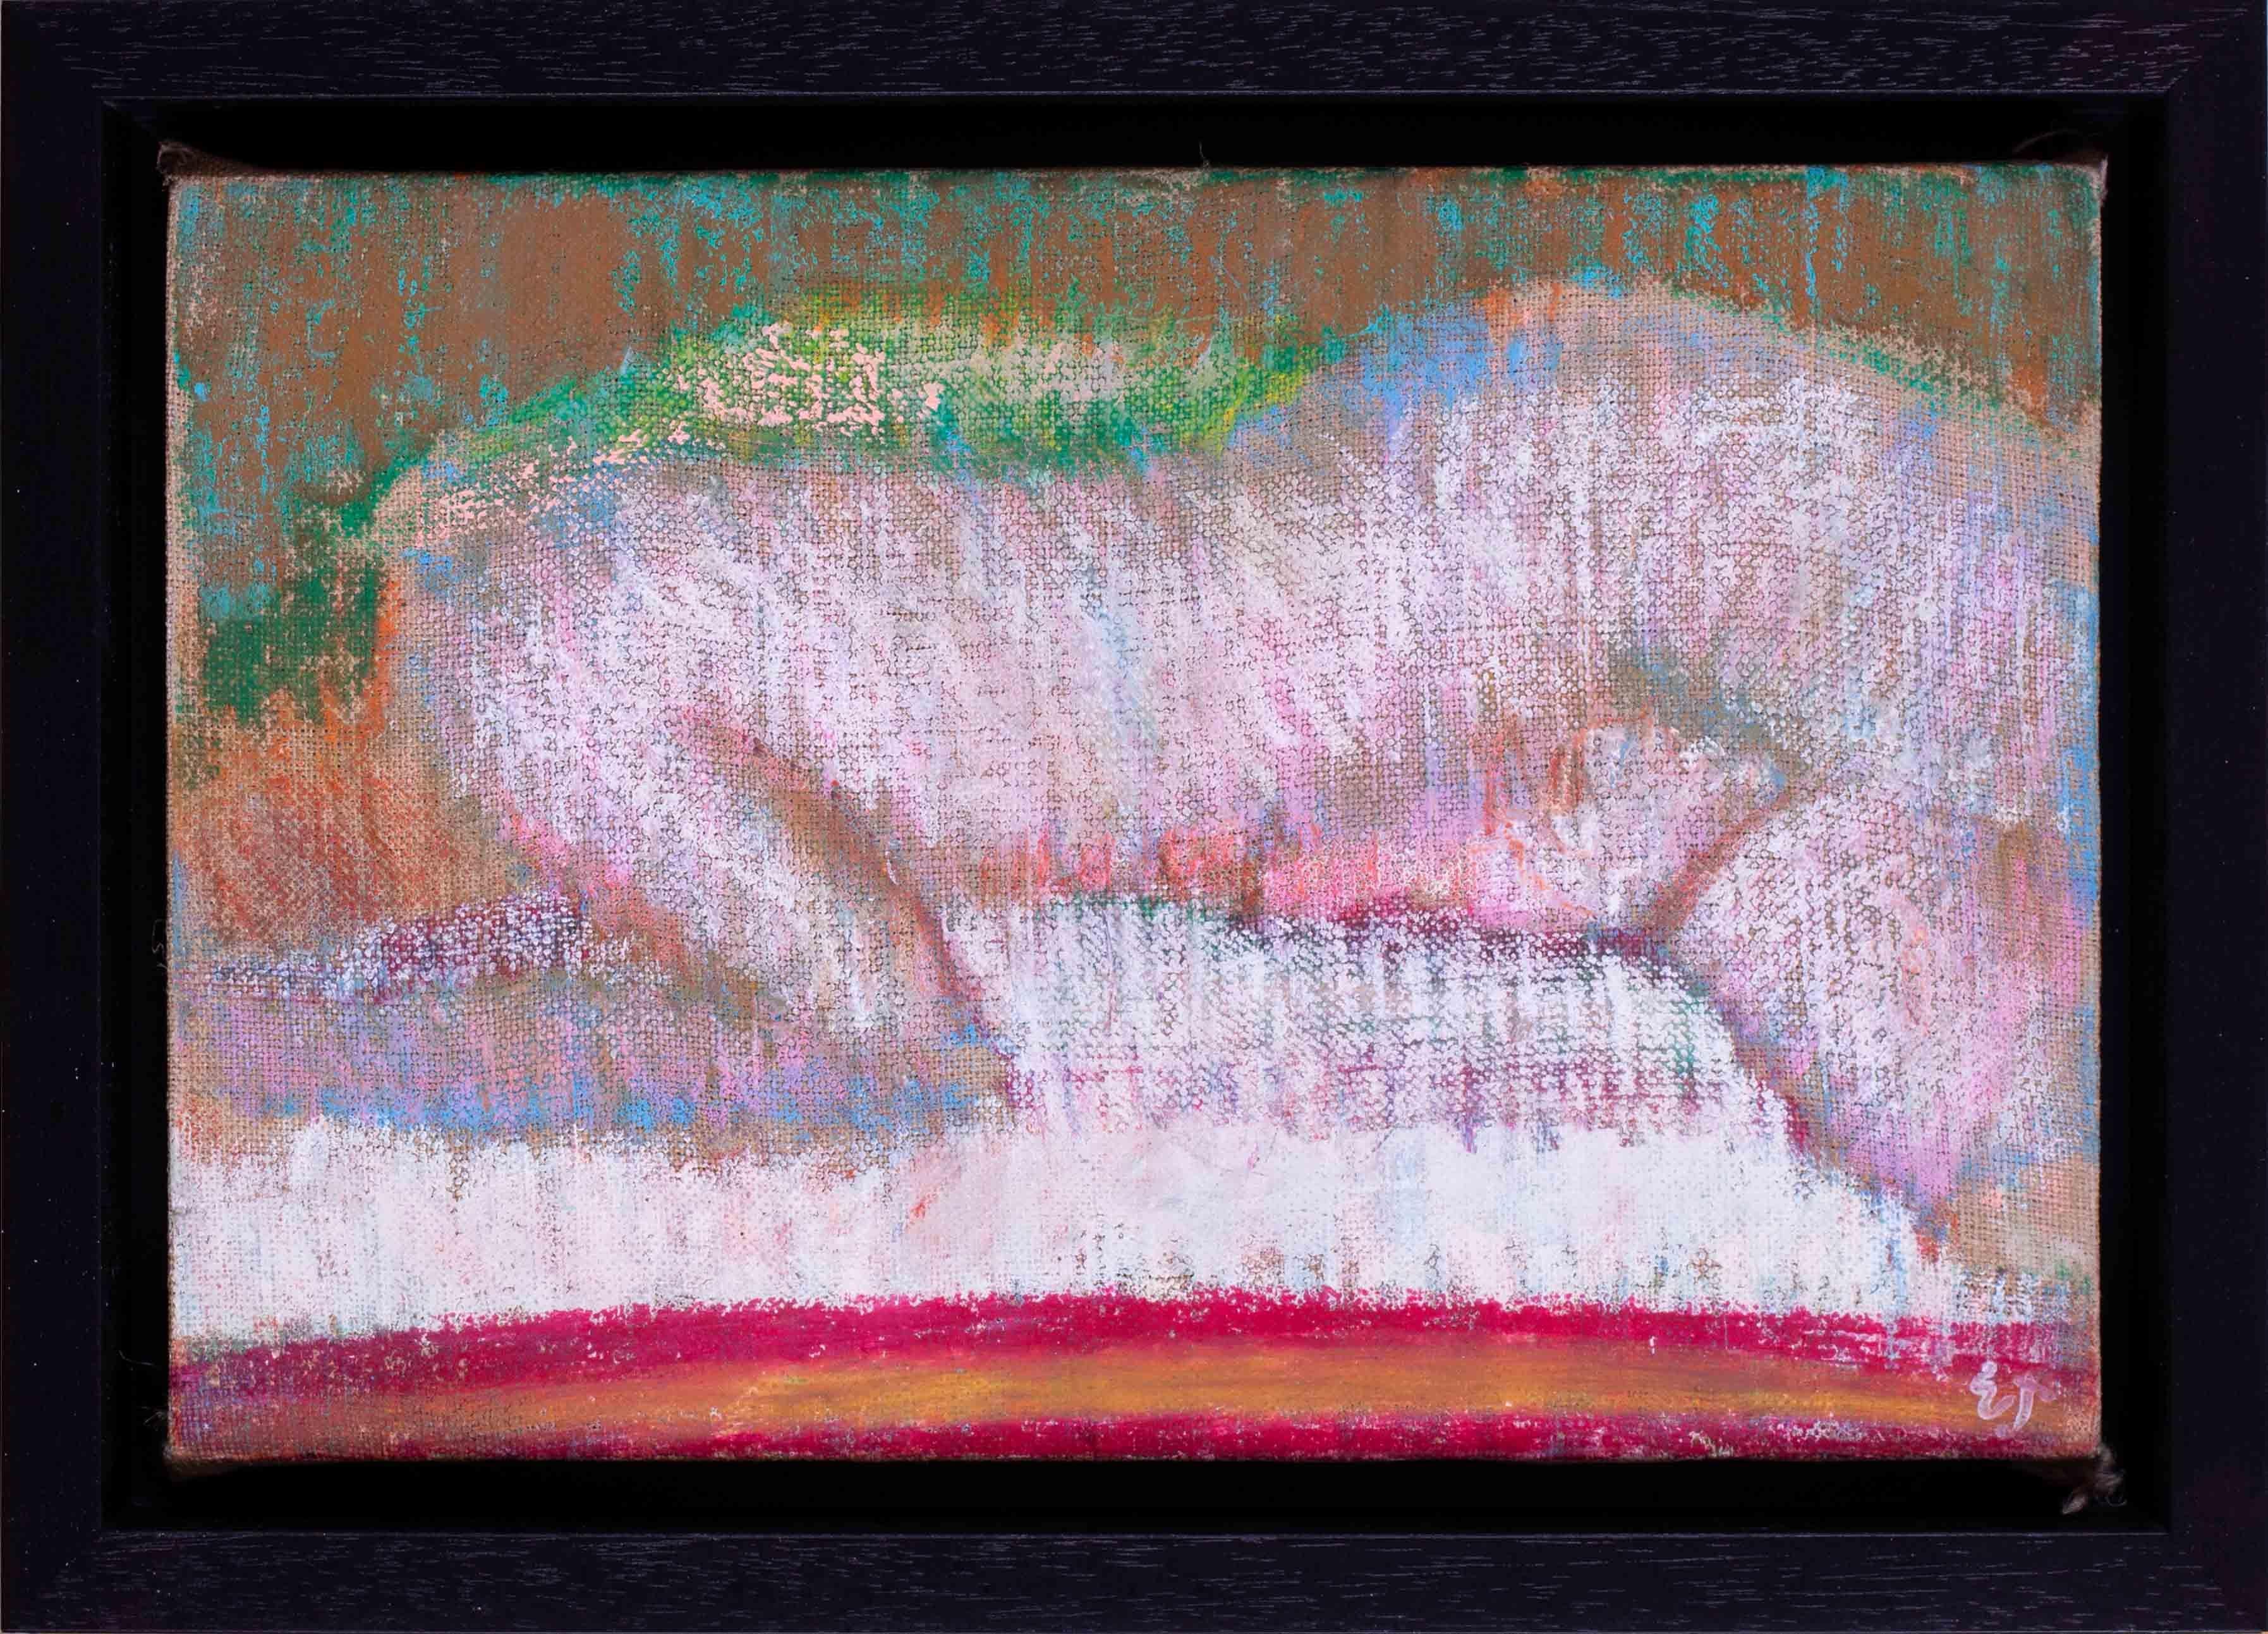 A beautifully executed oil pastel drawing of a nude lying on a bed by Modern British artist Ewart Johns (1923 - 2013), 1980

Ewart Johns (British, 1923 – 2013)
Nude On Bed
Oil pastel on canvas laid down on board
Signed with initials ‘EJ’ (lower